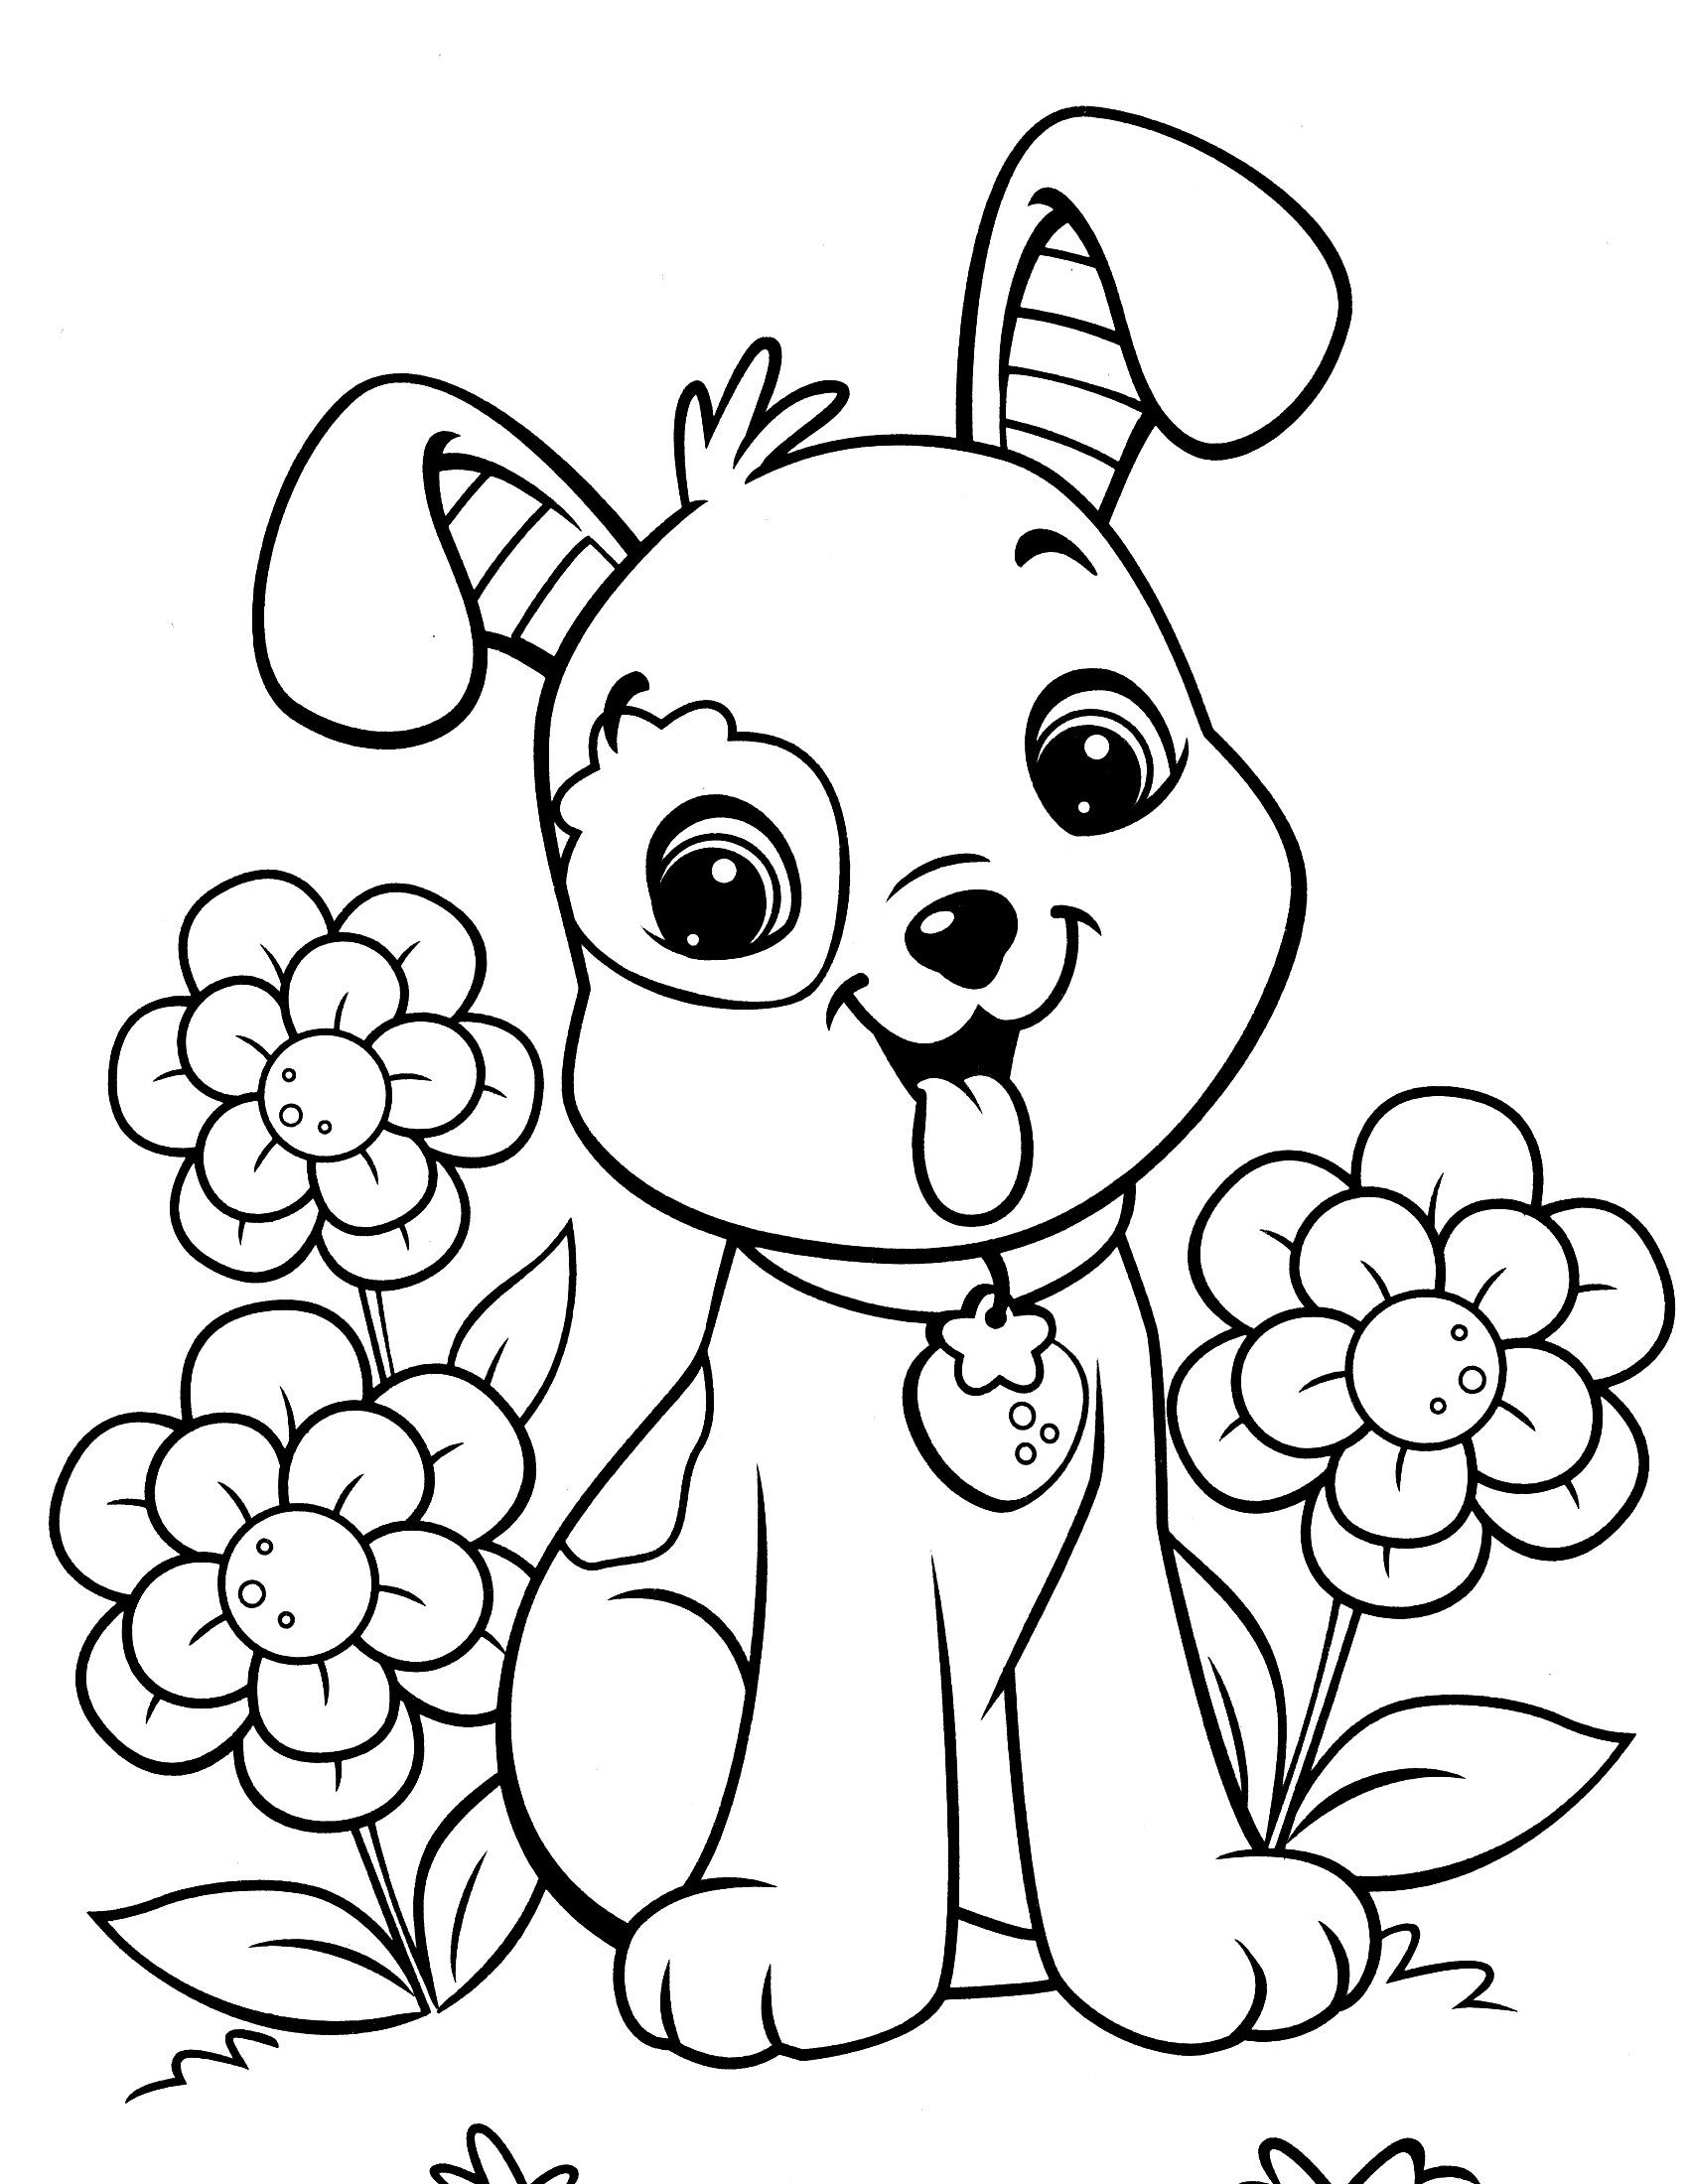 Image Result For Free Dog Coloring Pages | Coussin Cochon - Free Printable Dog Coloring Pages